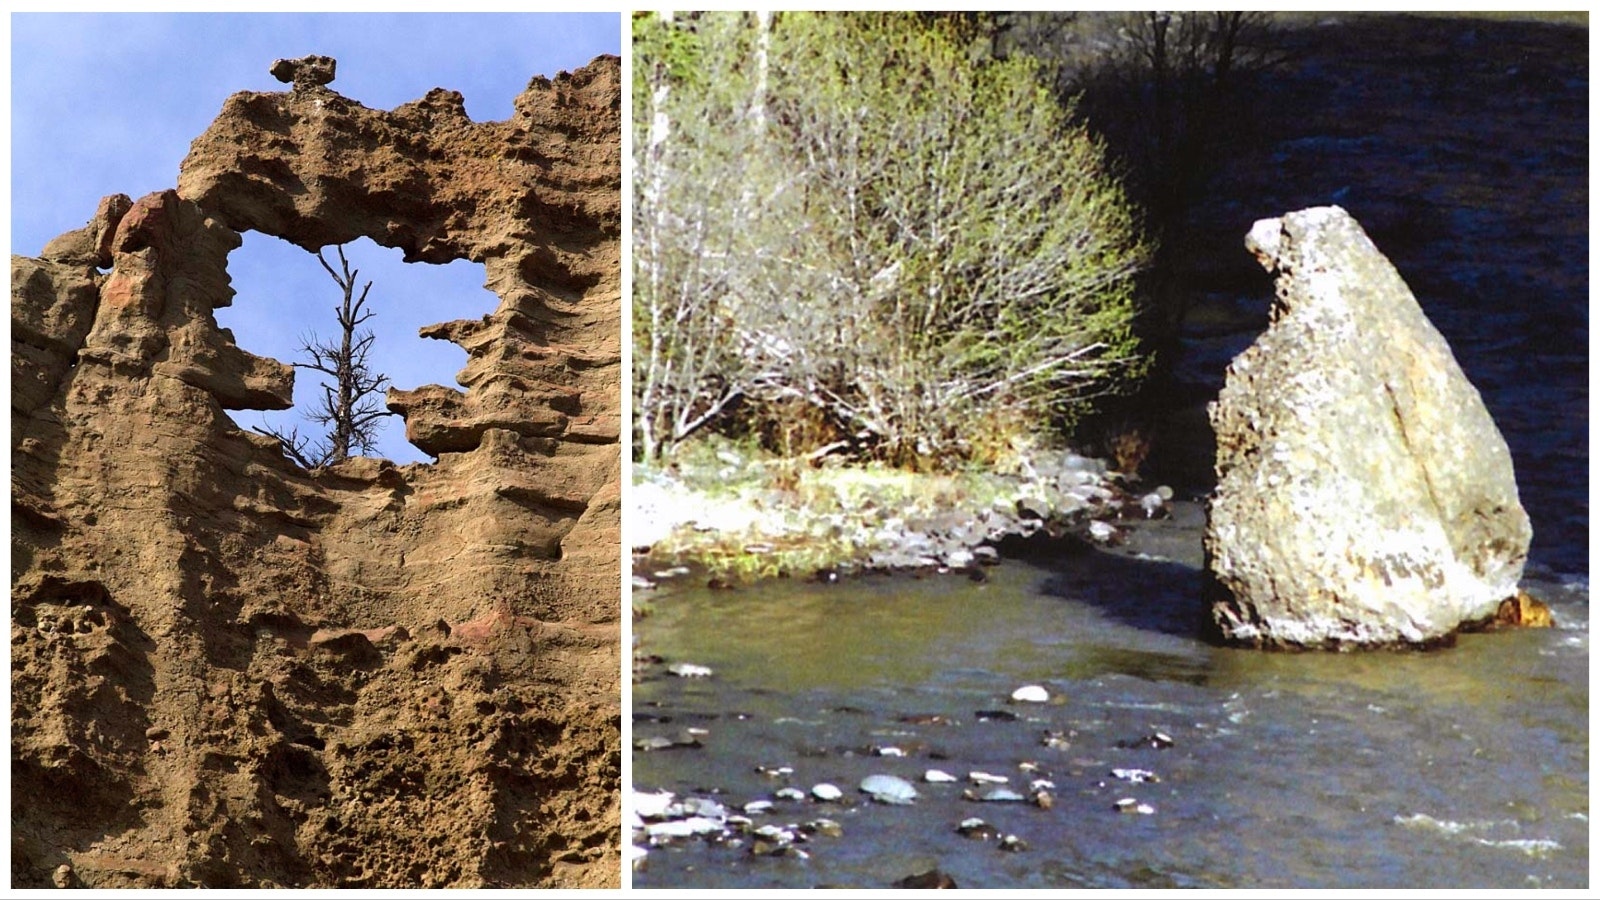 Cameo Rock, left, is one of the formations visible along the North Fork of the Shoshone, along with Fishing Bear Rock, right.